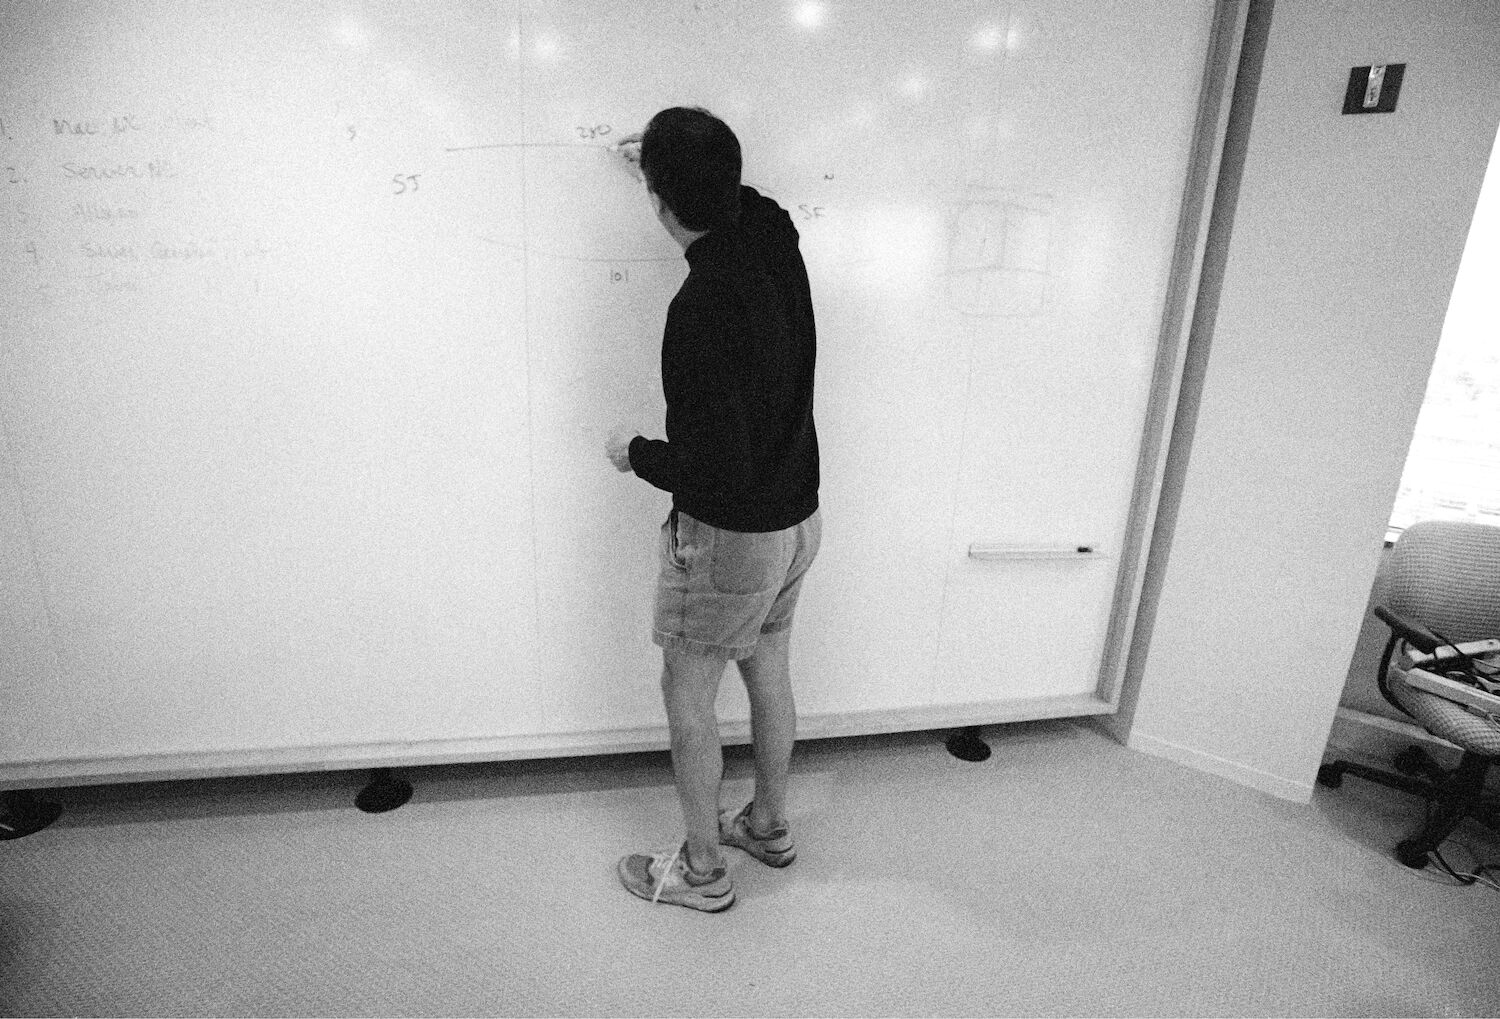 Steve has his back turned to the camera as he writes on a whiteboard. He wears a black turtleneck, shorts and sneakers.